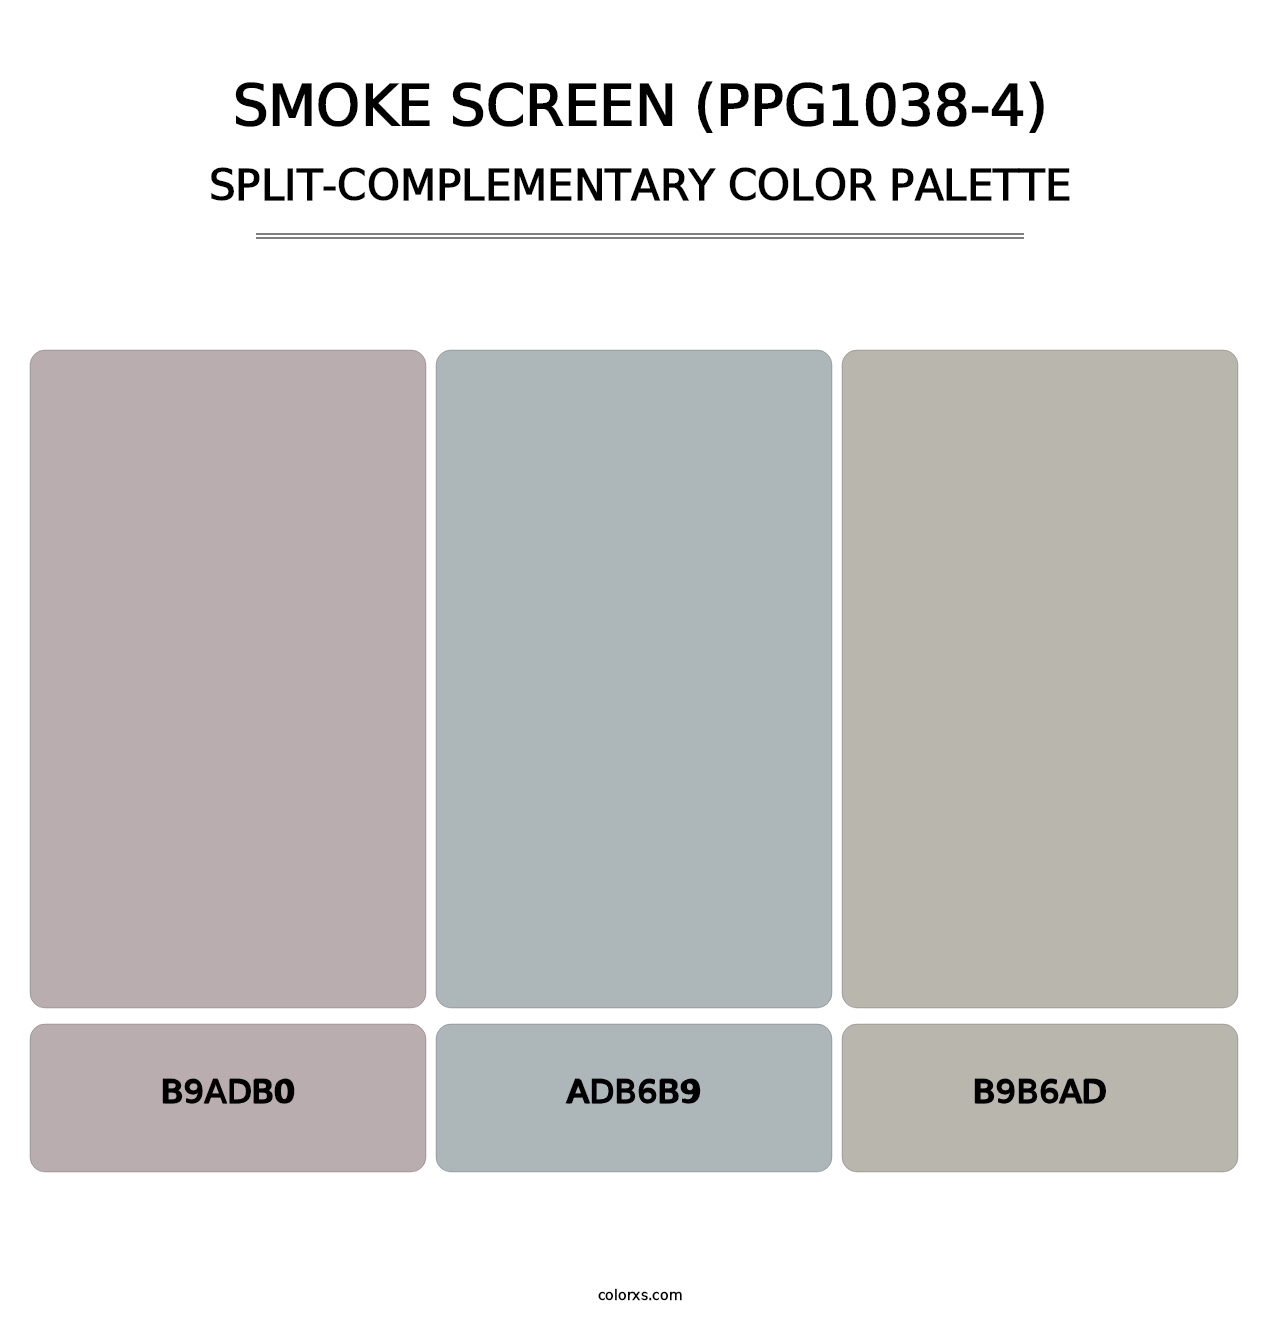 Smoke Screen (PPG1038-4) - Split-Complementary Color Palette